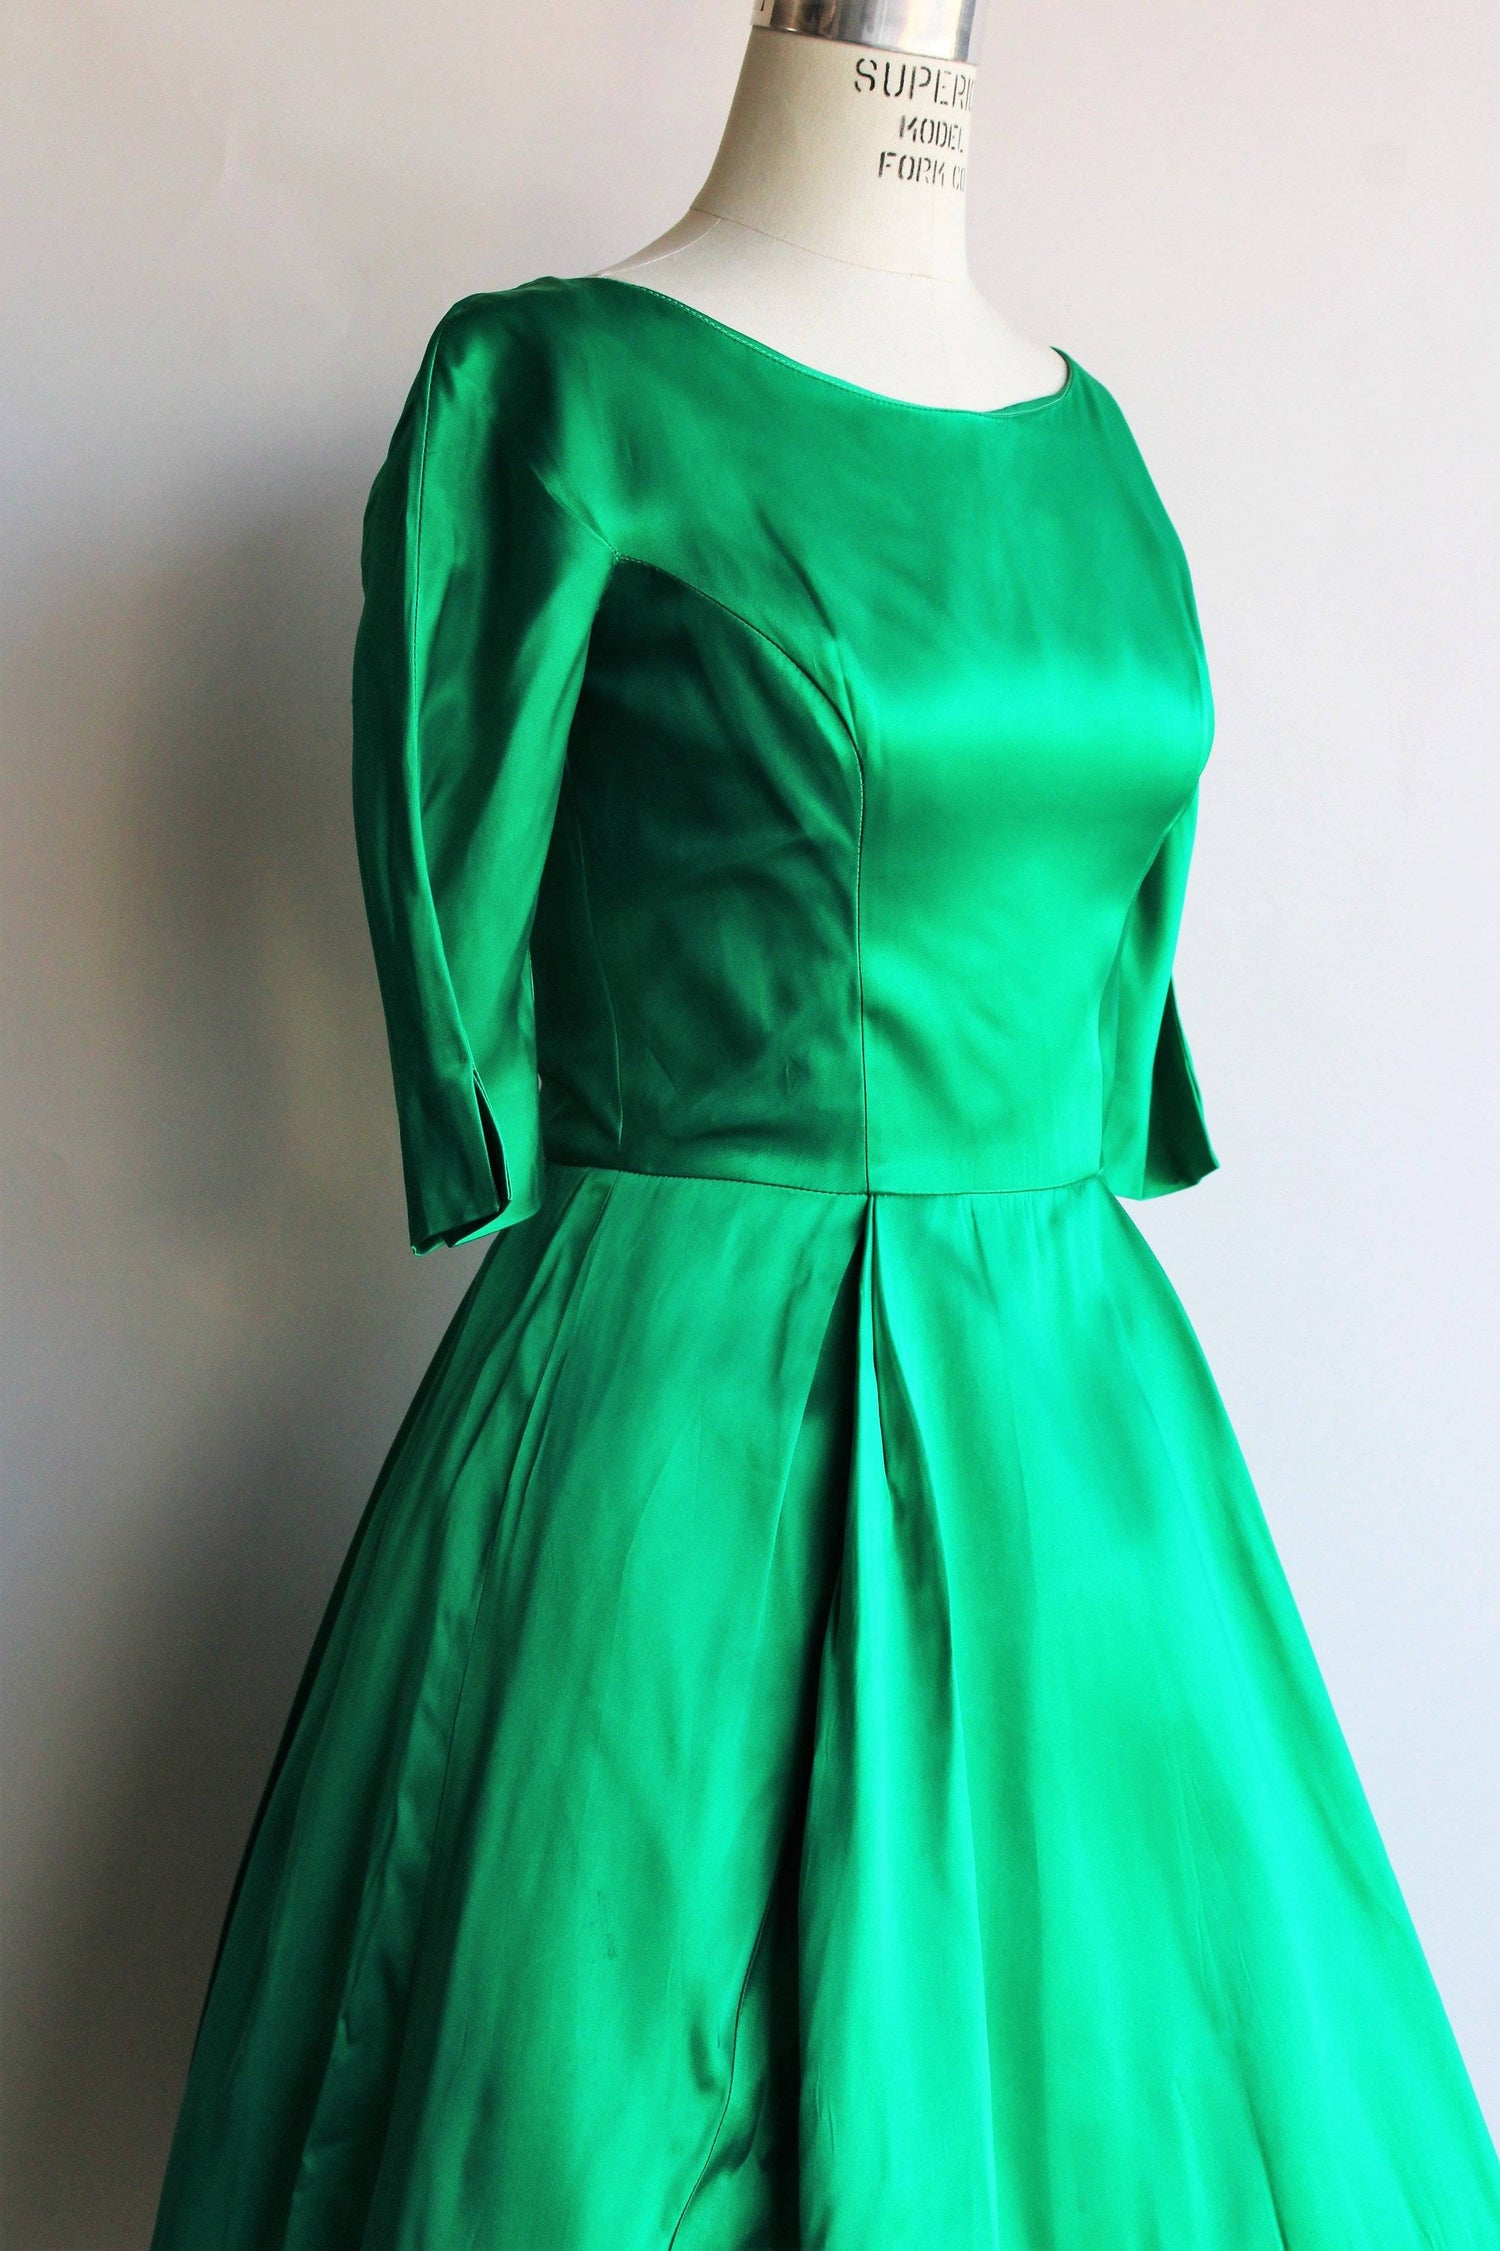 Vintage 1950s 1960s Lorrie Deb Fit and Flare Dress in Emerald Green Satin-Toadstool Farm Vintage-Full Circle Skirt,Kelly Green,Metal Zipper,New Look Dress,Vintage 1950s 1960s Lorrie Deb Fit and Flare Dress in Emerald Green Satin